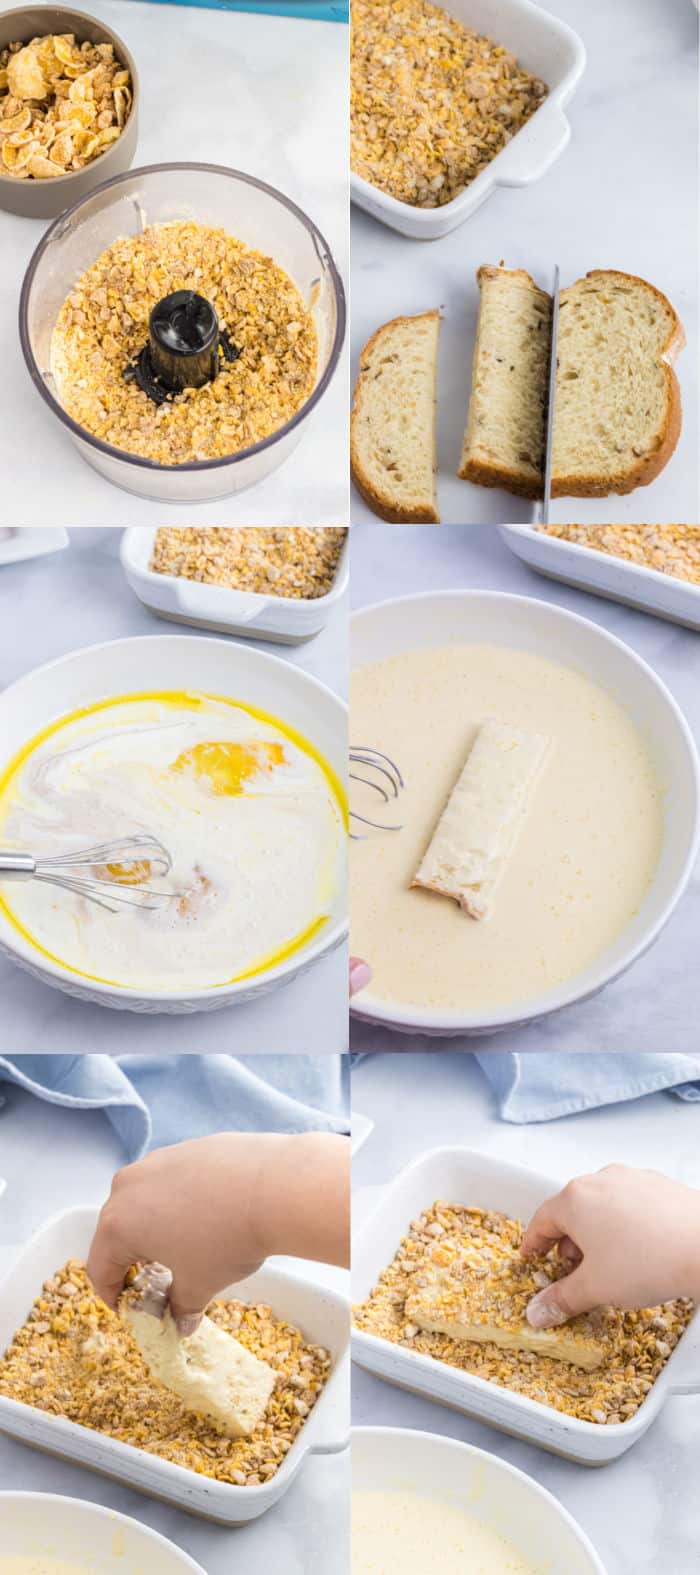 cereal crumbs in a food processor bowl, pieces of bread being cut into quarters to make sticks, milk and eggs in a shallow bowl with a whisk, bread stick soaking in custard mixture, soaked bread stick being dipped into cereal crumbs, bread stick coated in cereal